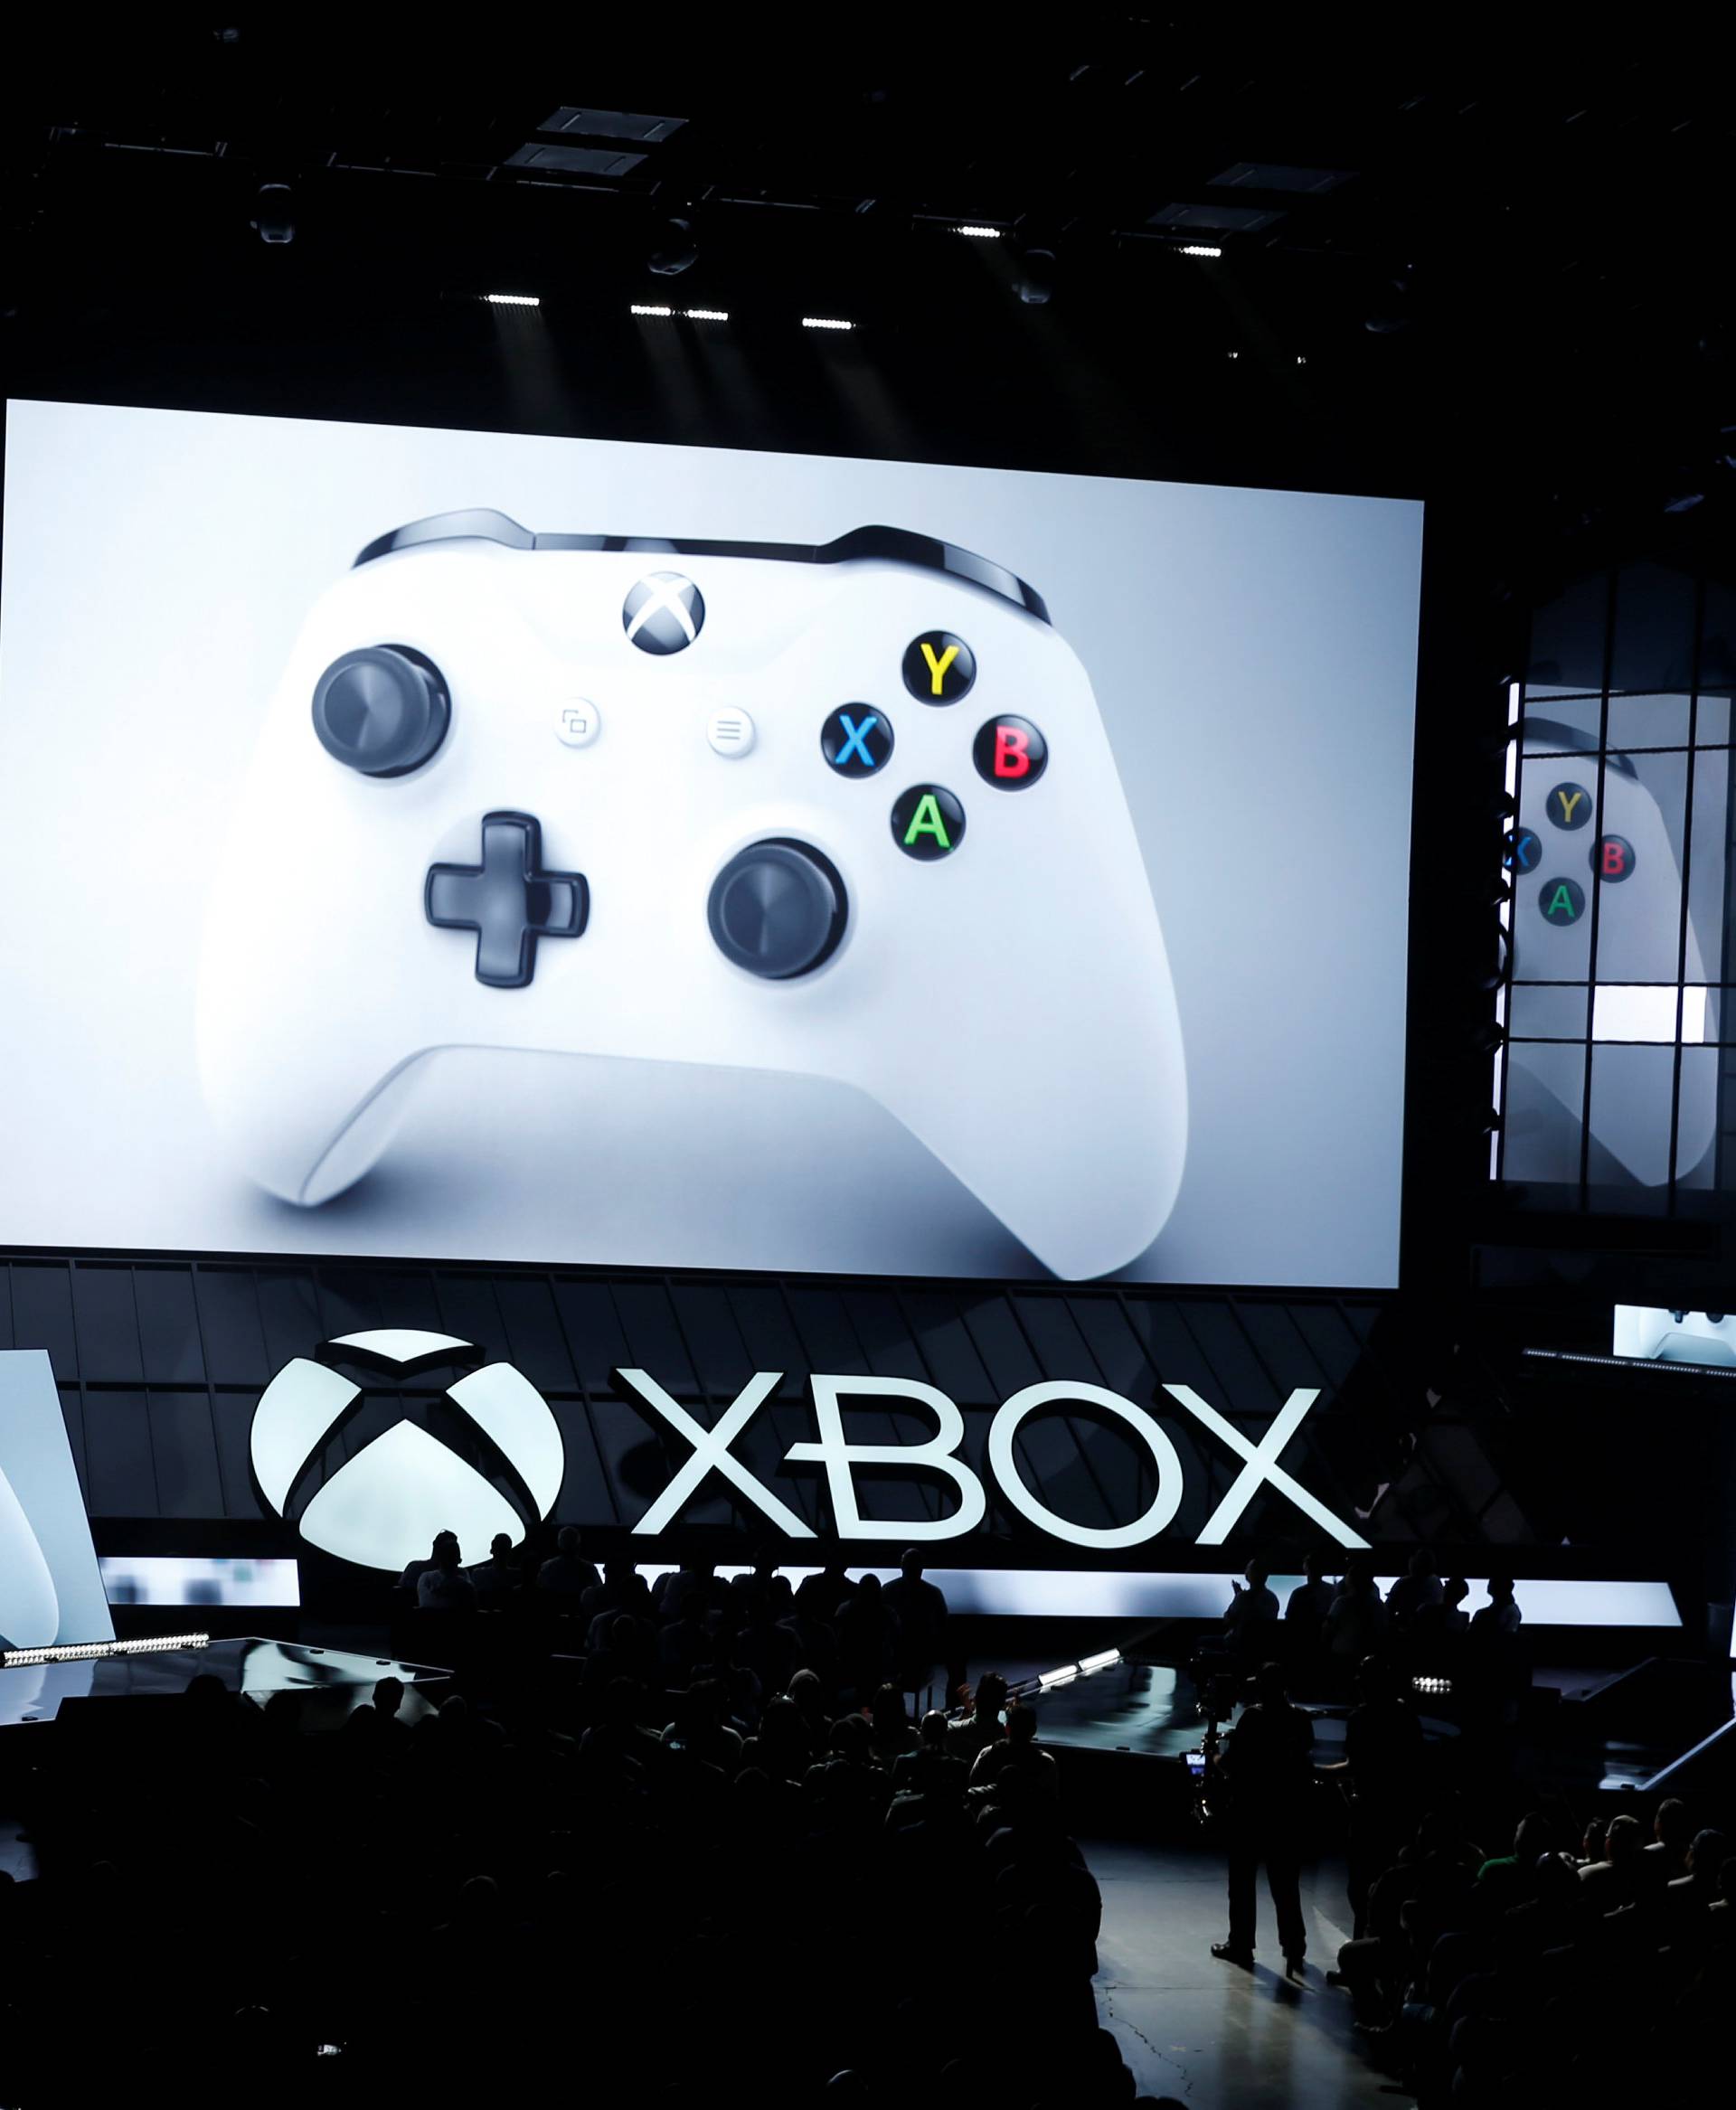 Microsoft displays consoles at the Xbox E3 2016 media briefing in Los Angeles